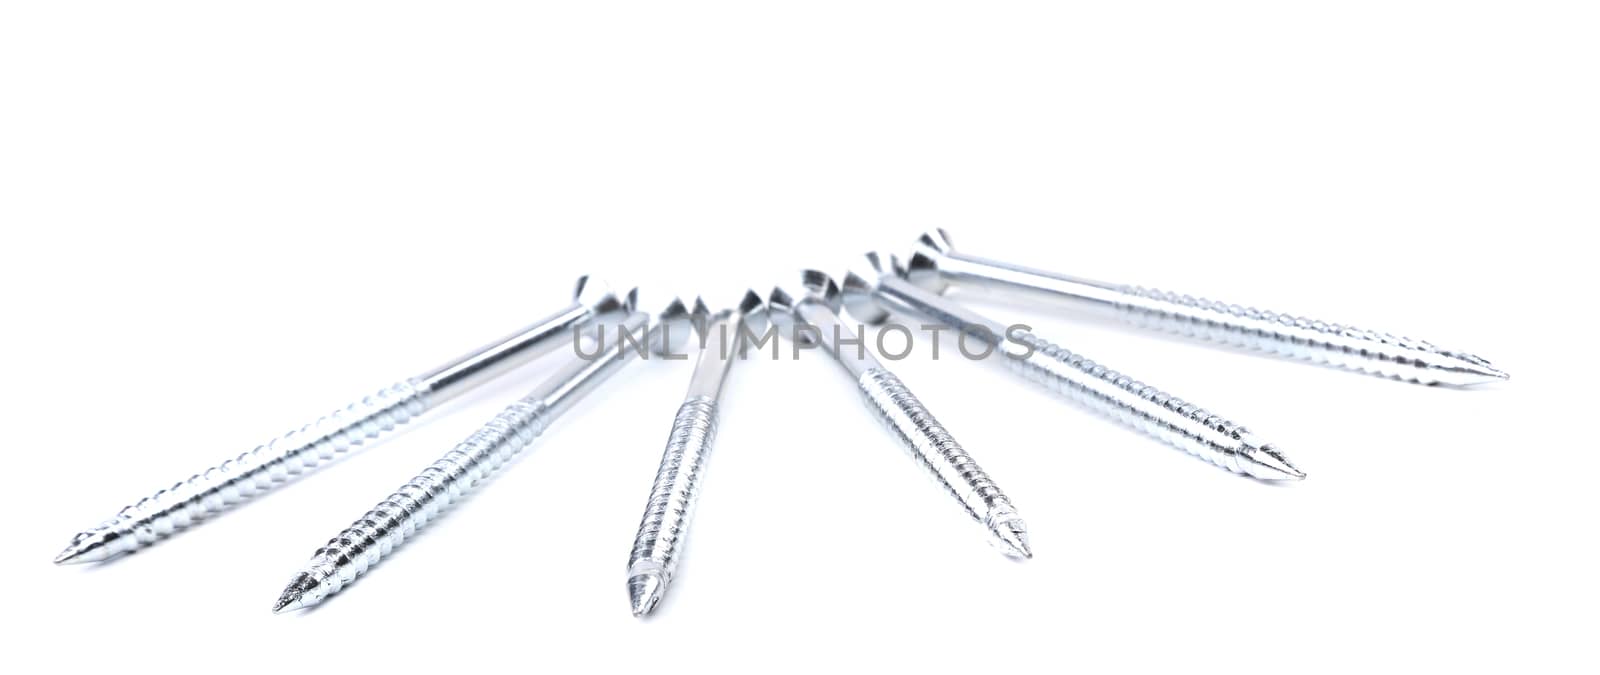 Fan of screws. Isolated on a white background.